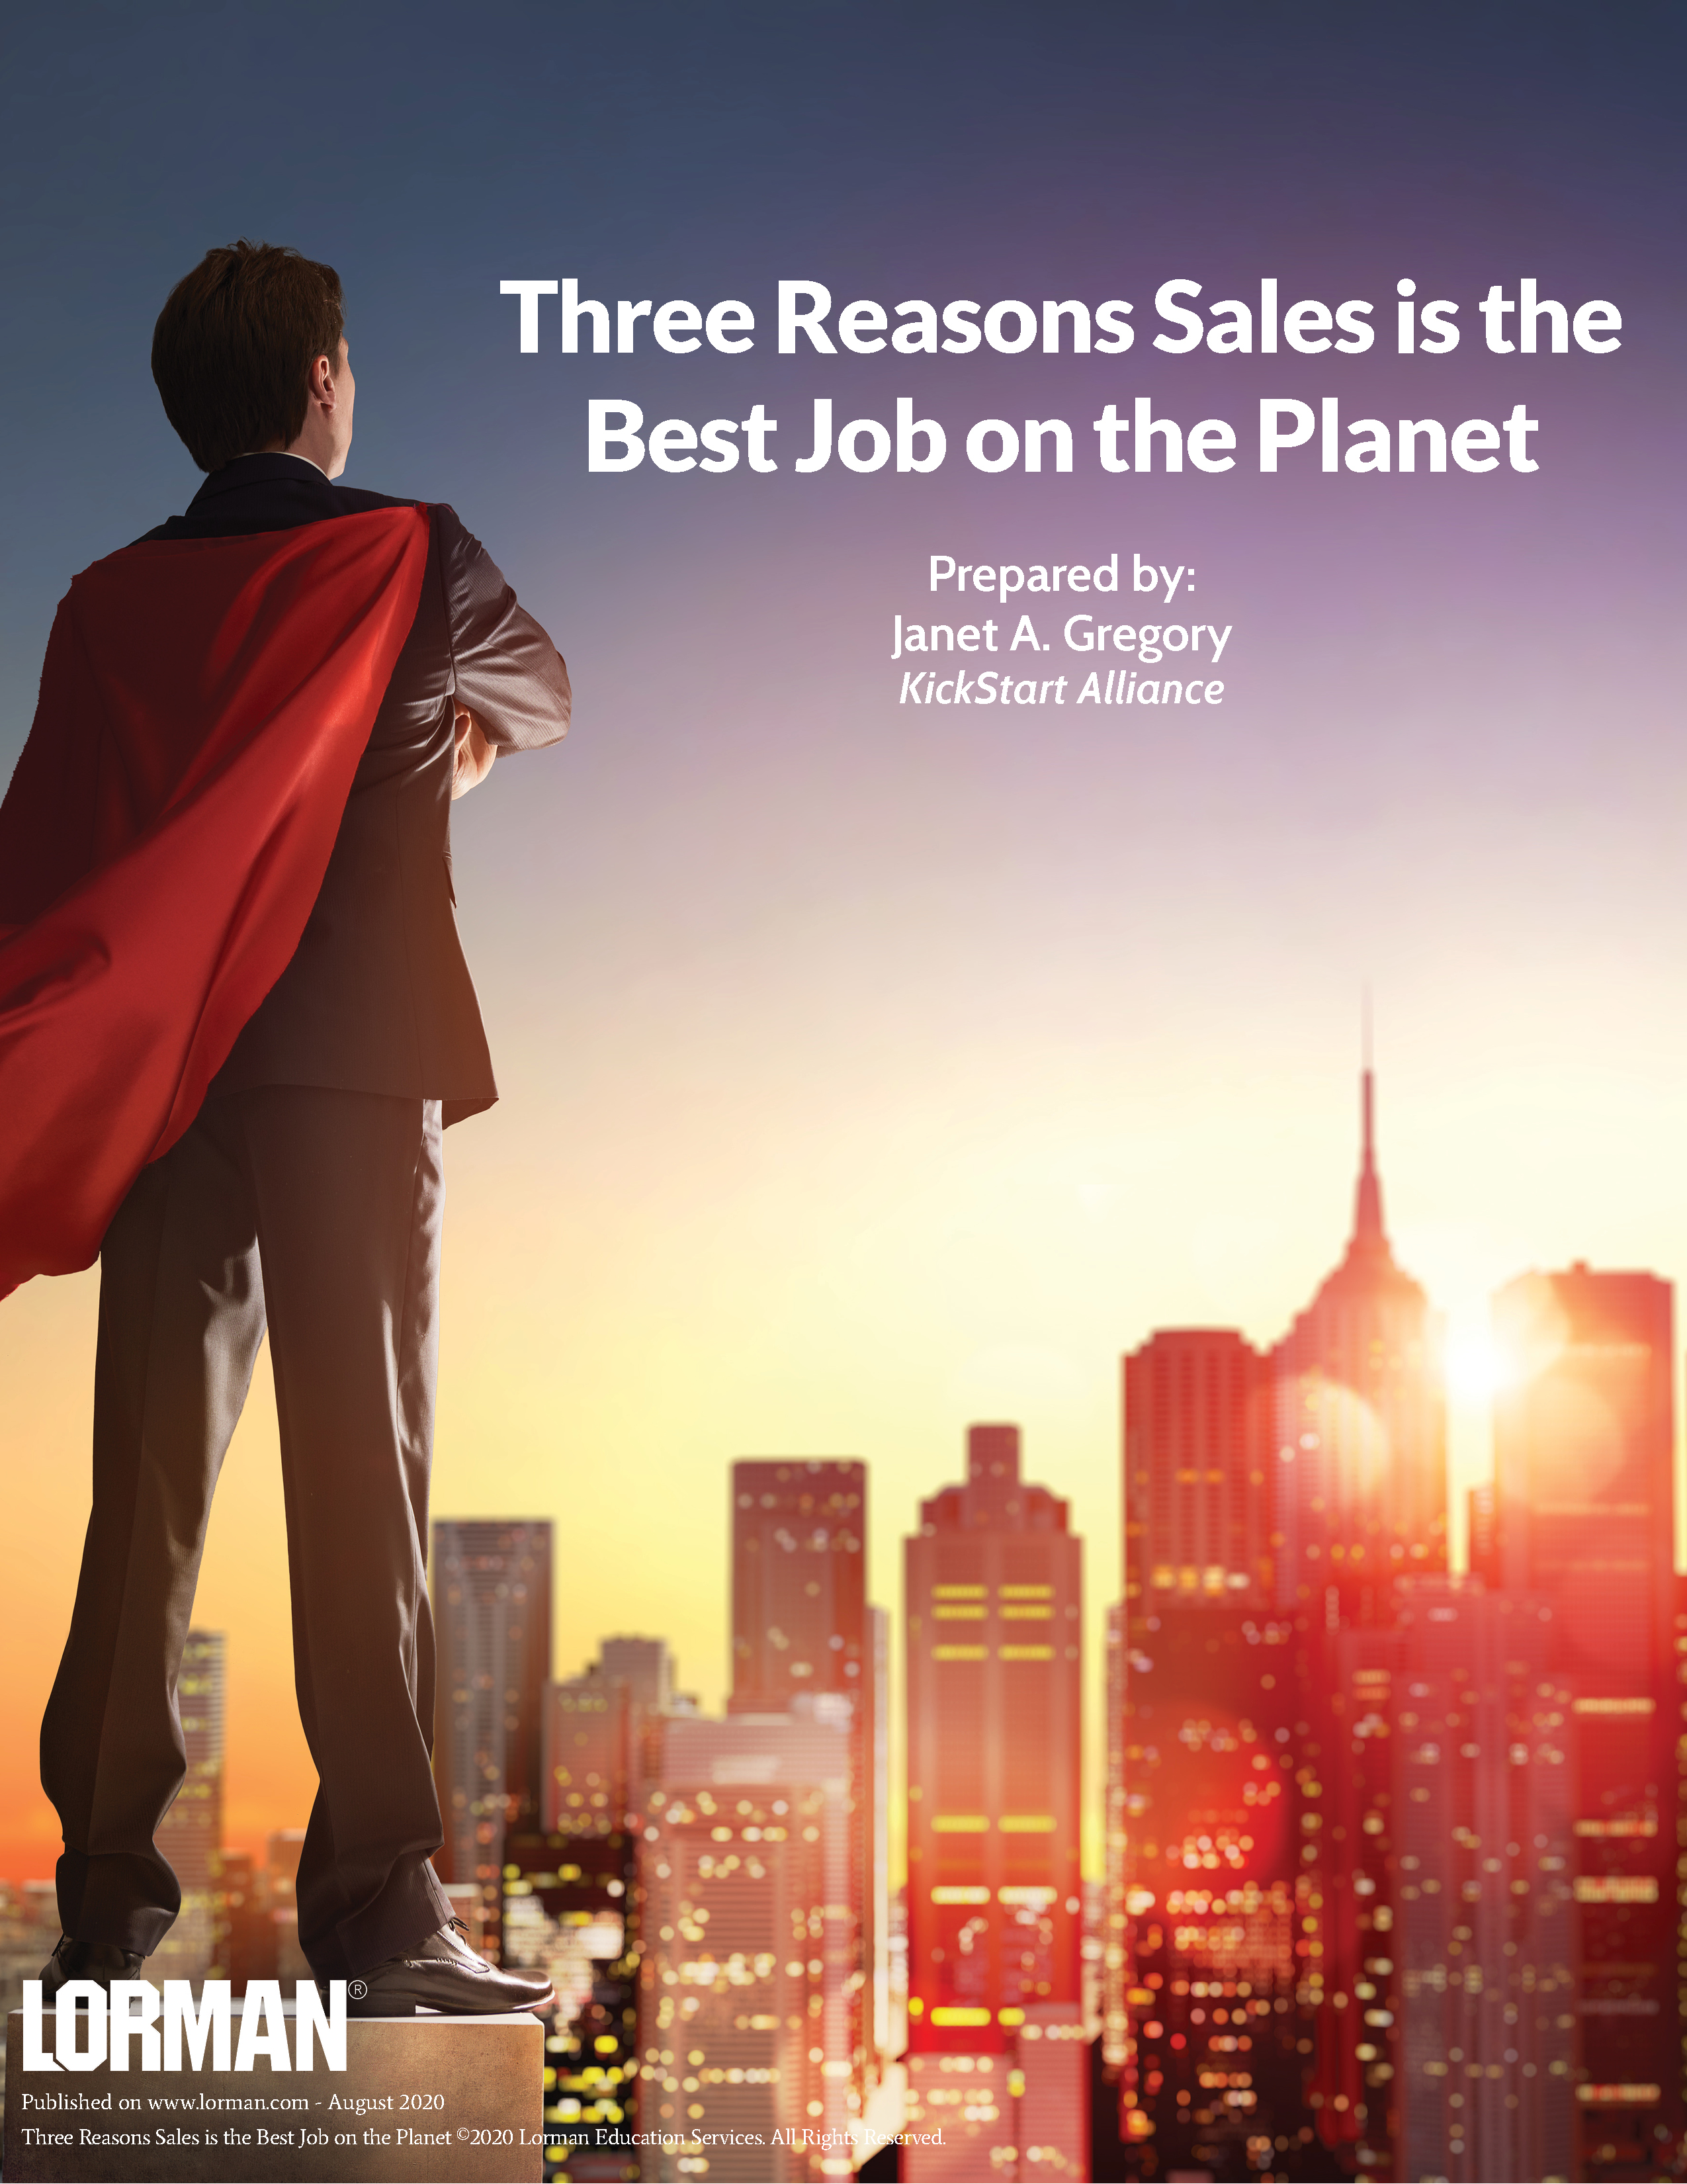 Three Reasons Sales is the Best Job on the Planet